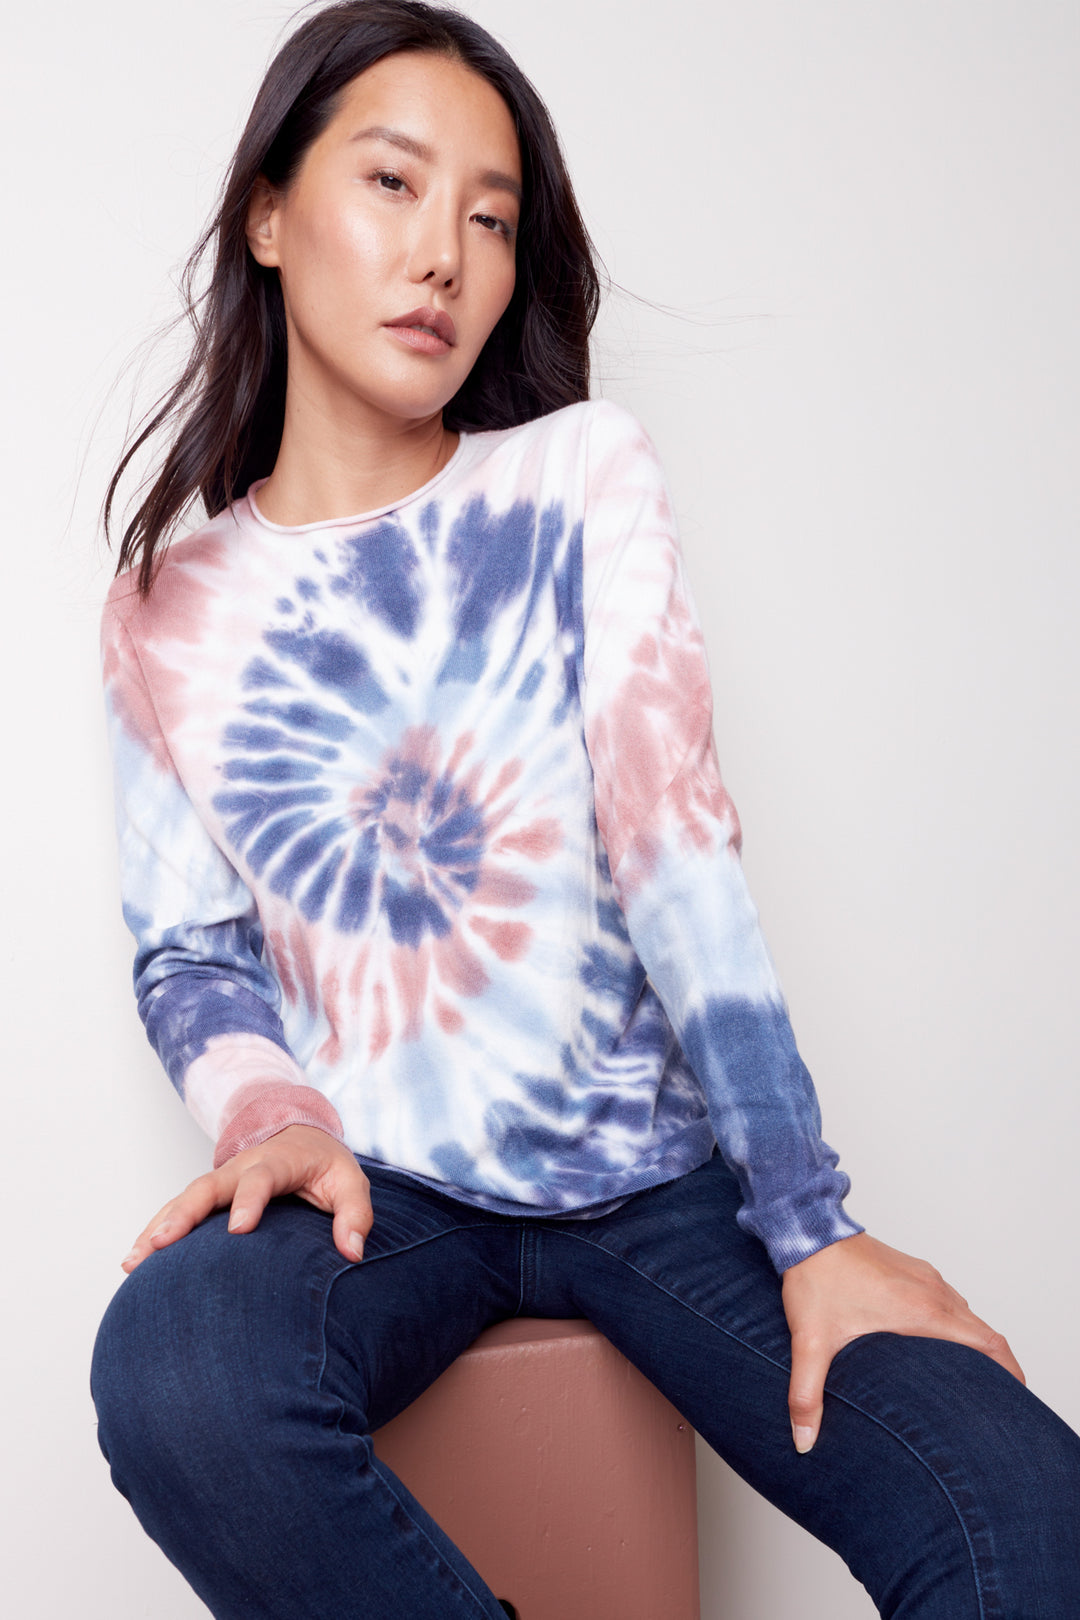 This Swirl Tiedye Long Sleeve Top features a classic crew-neck design with a vibrant tie-dye pattern and a round hem for a modern streetwear look.